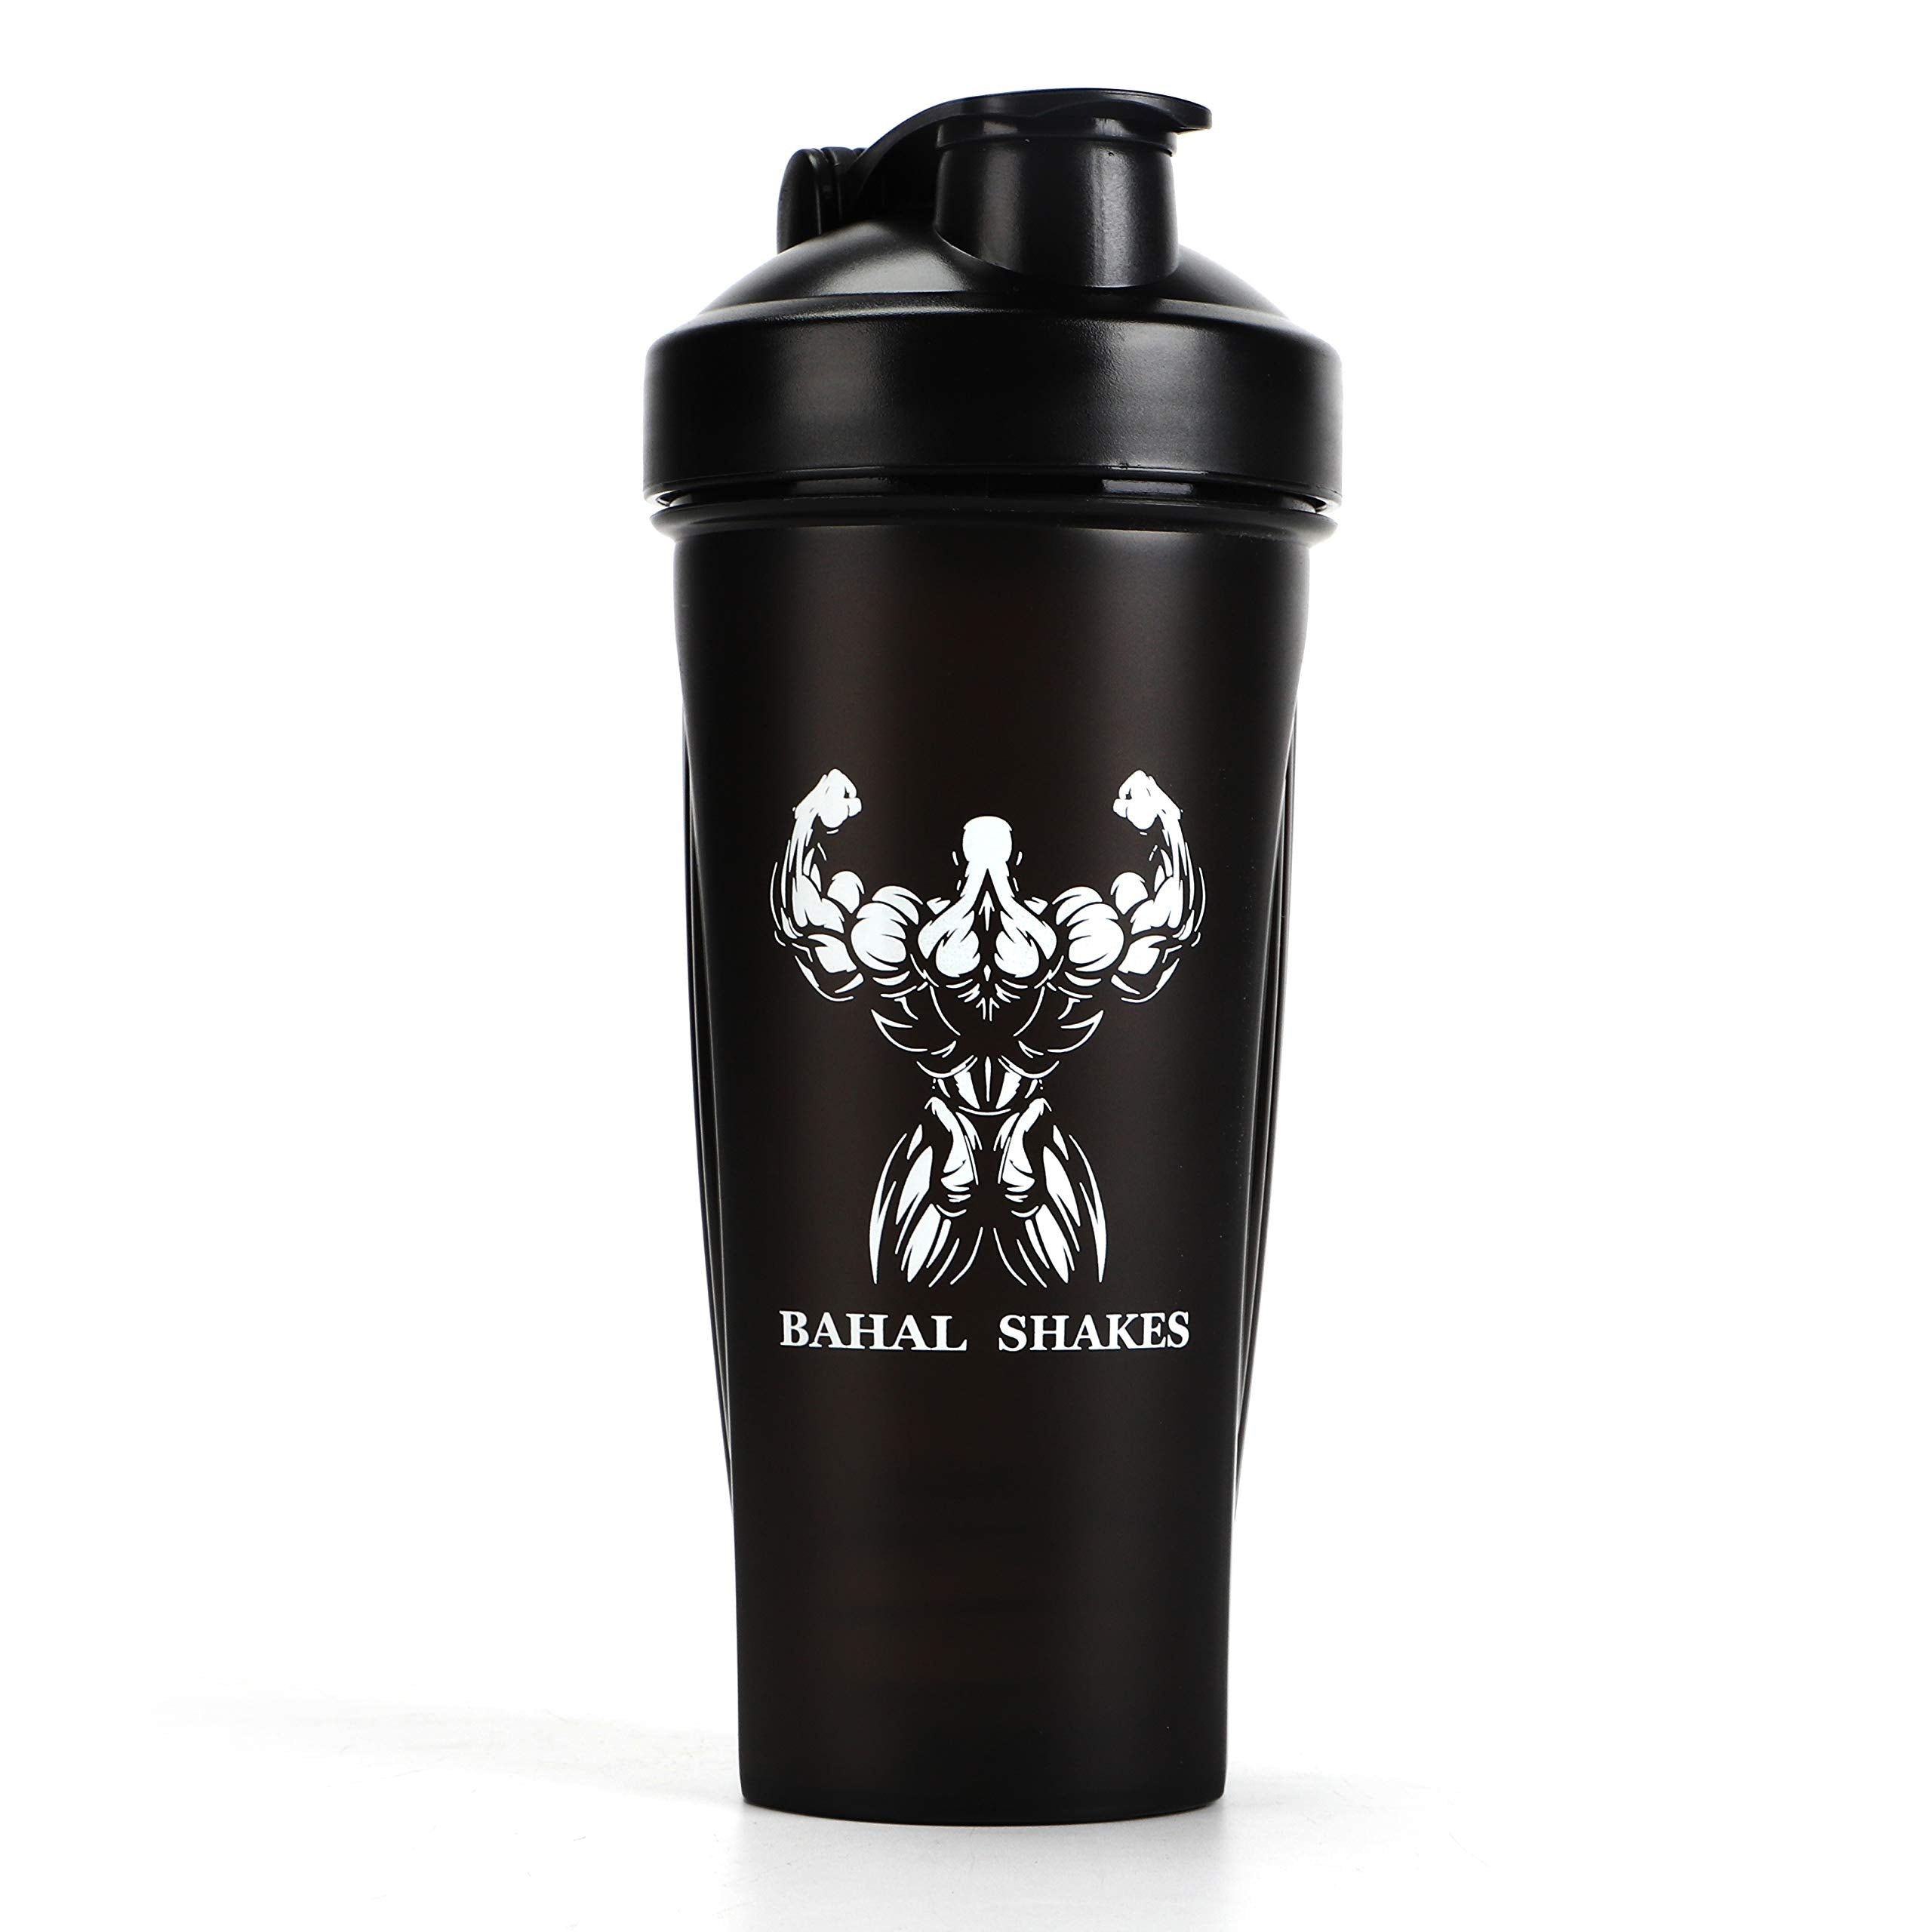 Bahal shakes,Protein Shaker Bottle 600ml,With Mixer Ball, Non-leakable for Fitness Sports and Travel, Shakes And Blends Any Supplement In Seconds